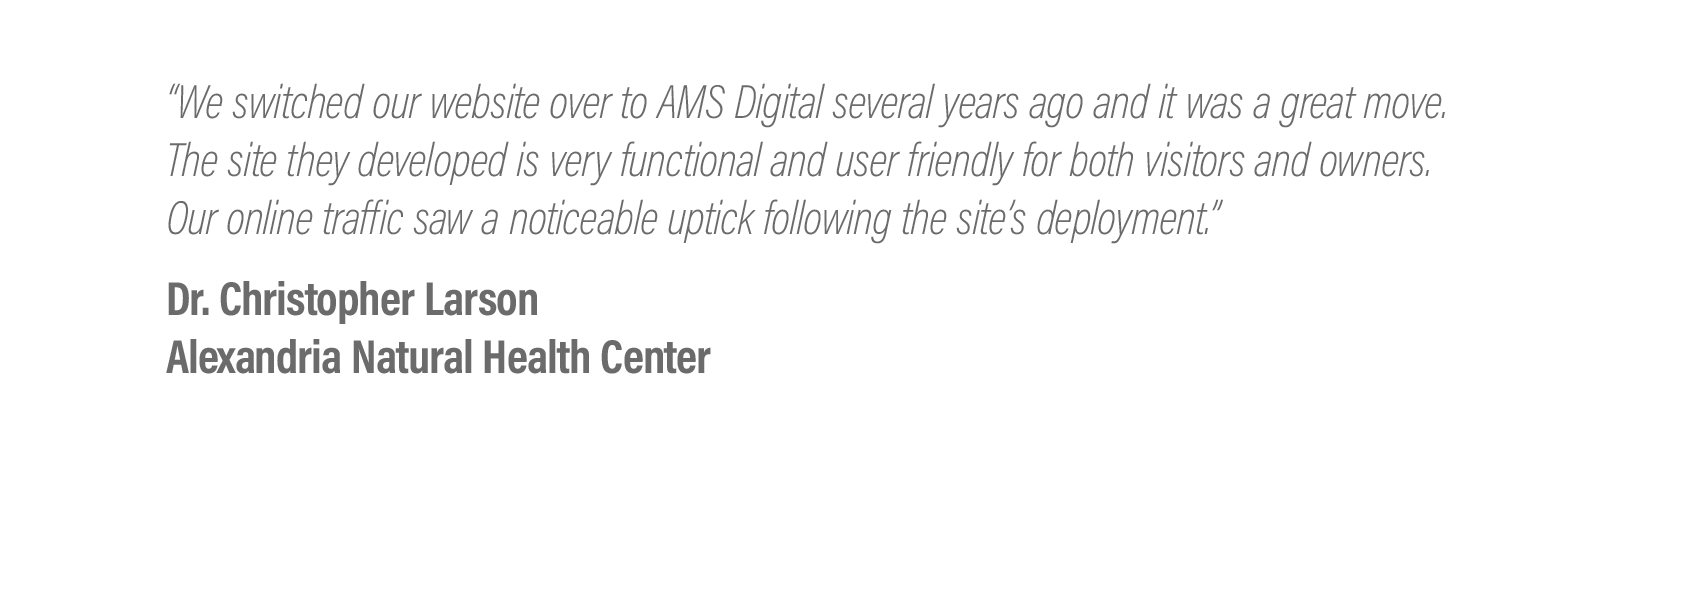  We switched our website over to AMS Digital several years ago and it was a great move. The site they developed is very functional and user friendly for both visitors and owners. Our online traffic saw a noticeable uptick following the site's deploym